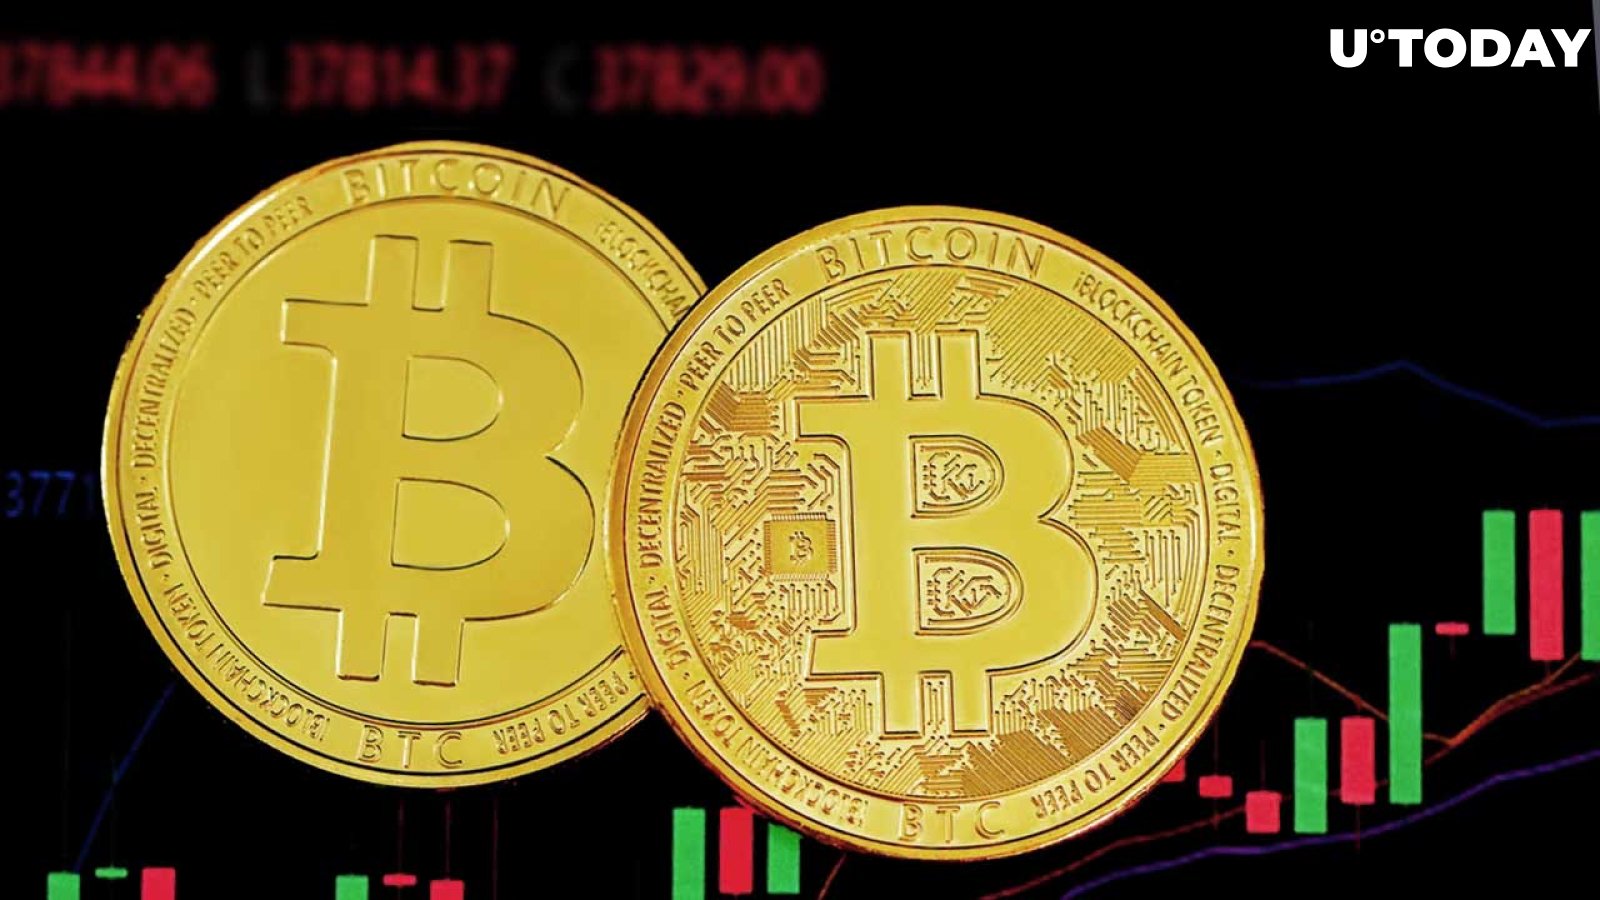 Bitcoin Forecast Increased to $95,000 by End of 2023, Says Analyst; Here's Why